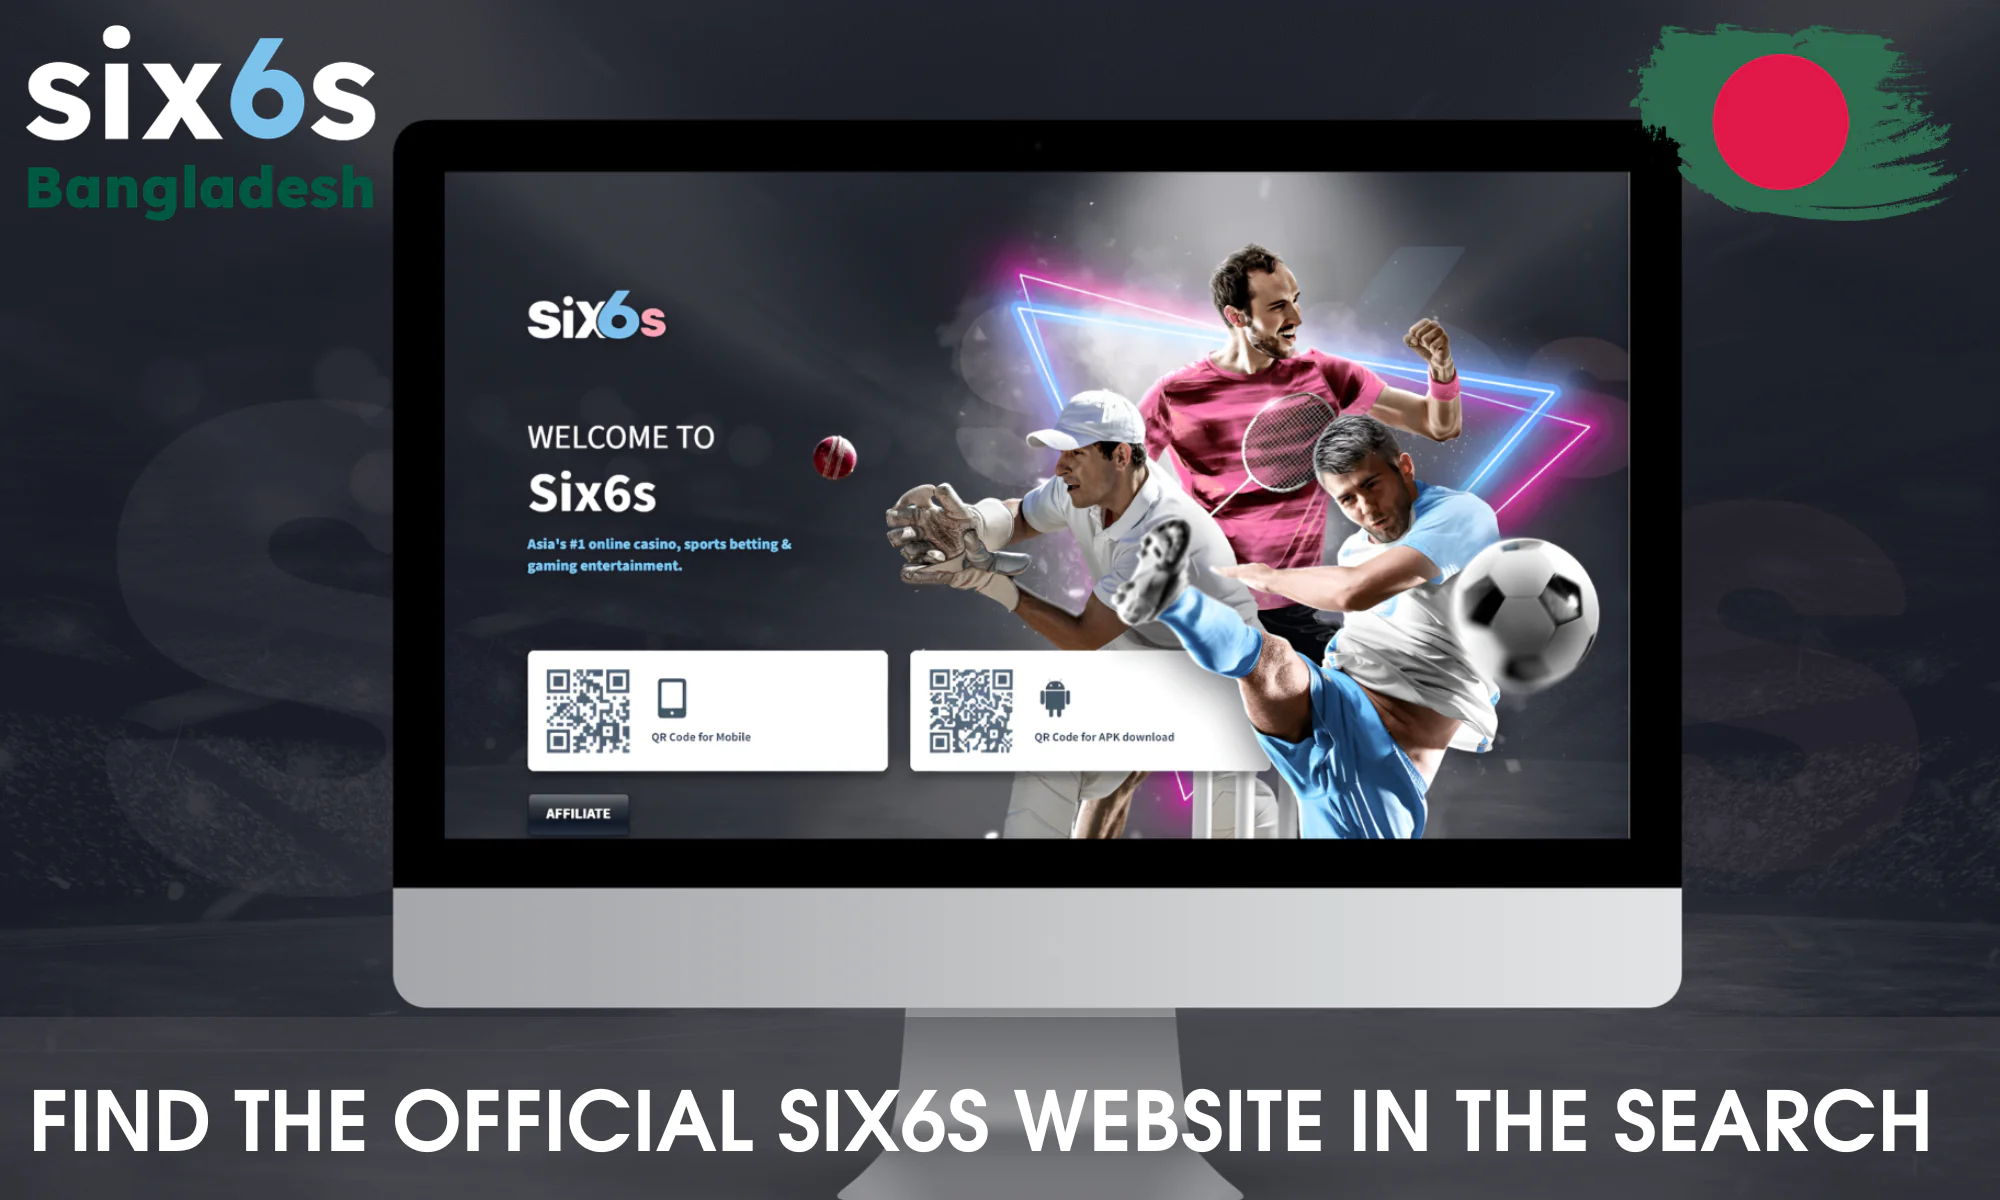 Find the official Six6s page in the search